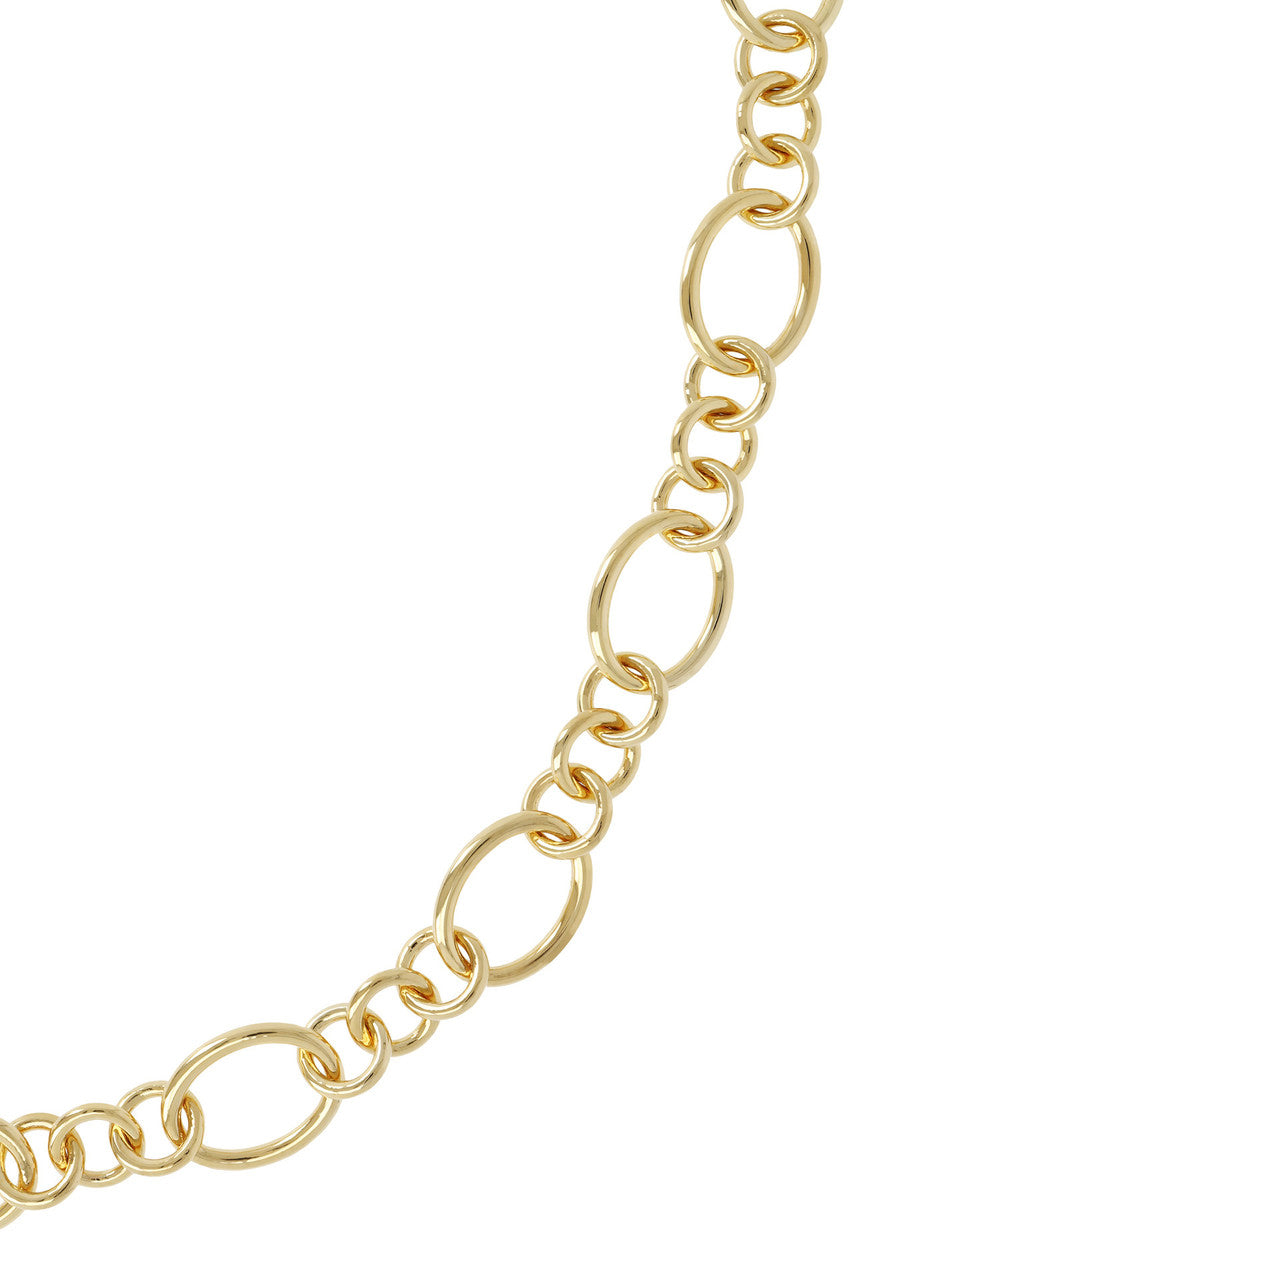 LARGE OVAL LINK NECKLACE – Soave Oro